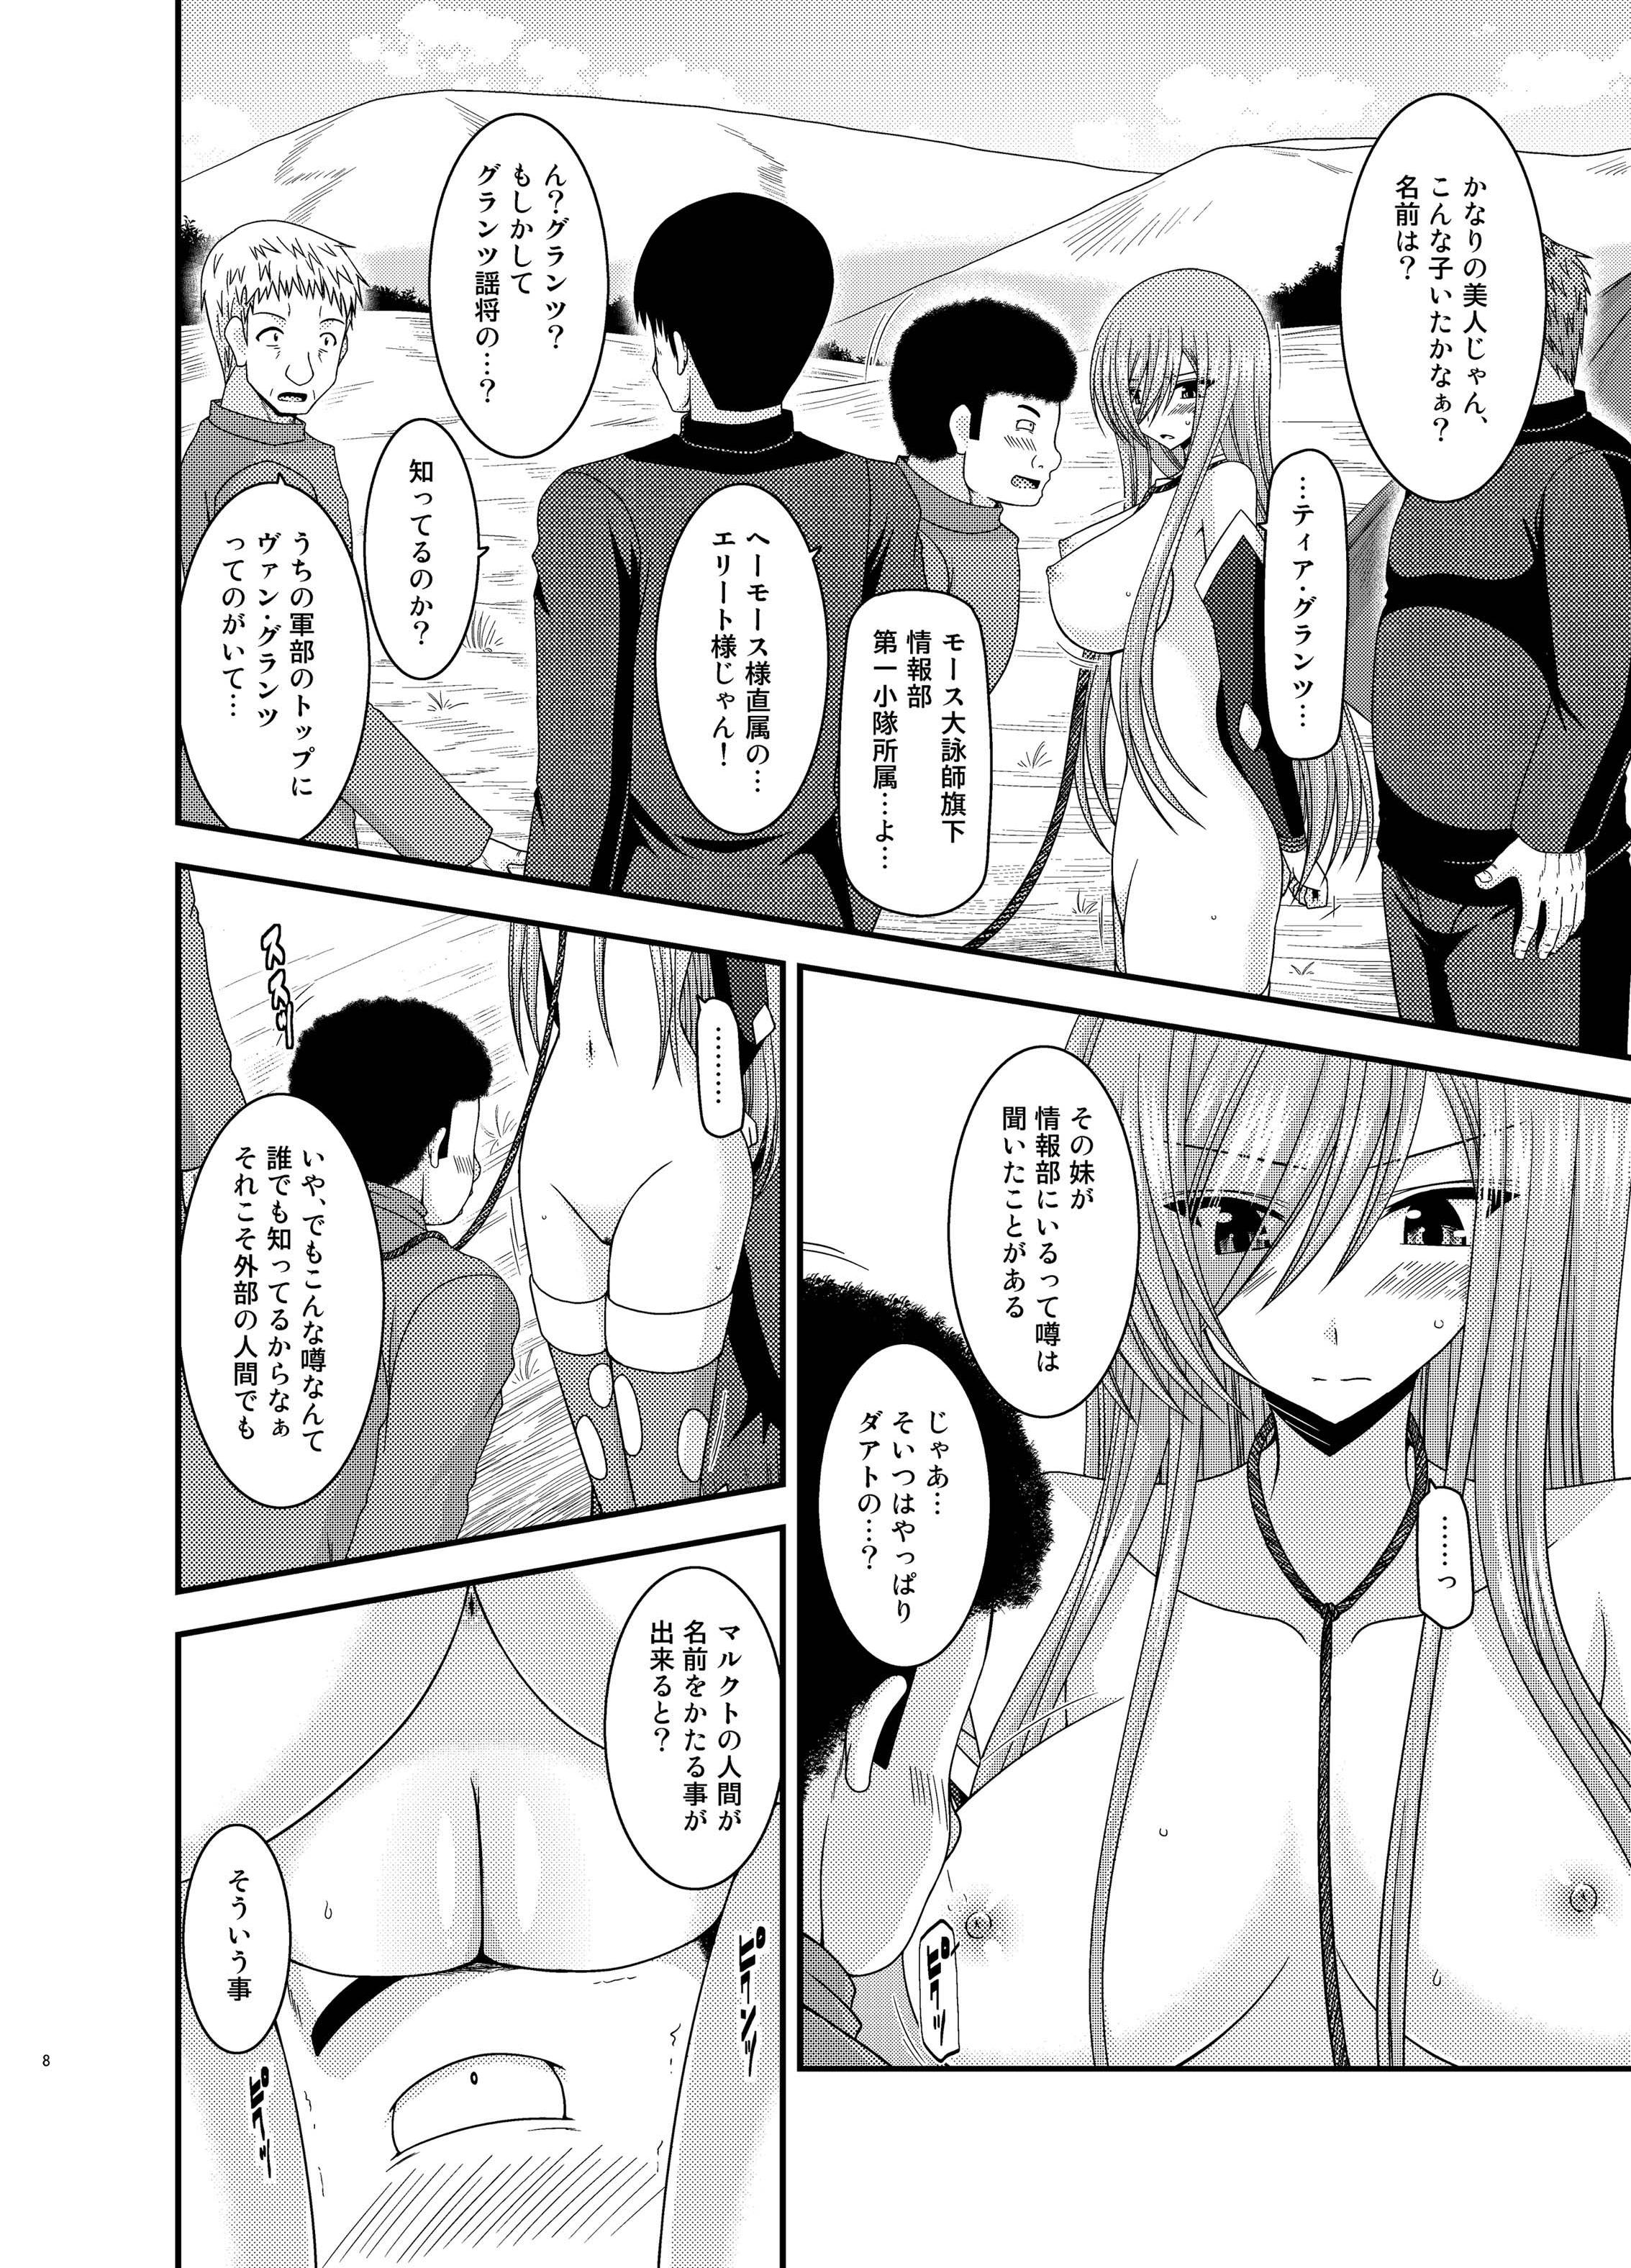 Fucked Melon ga Chou Shindou! R10 - Tales of the abyss Insane Porn - Page 8